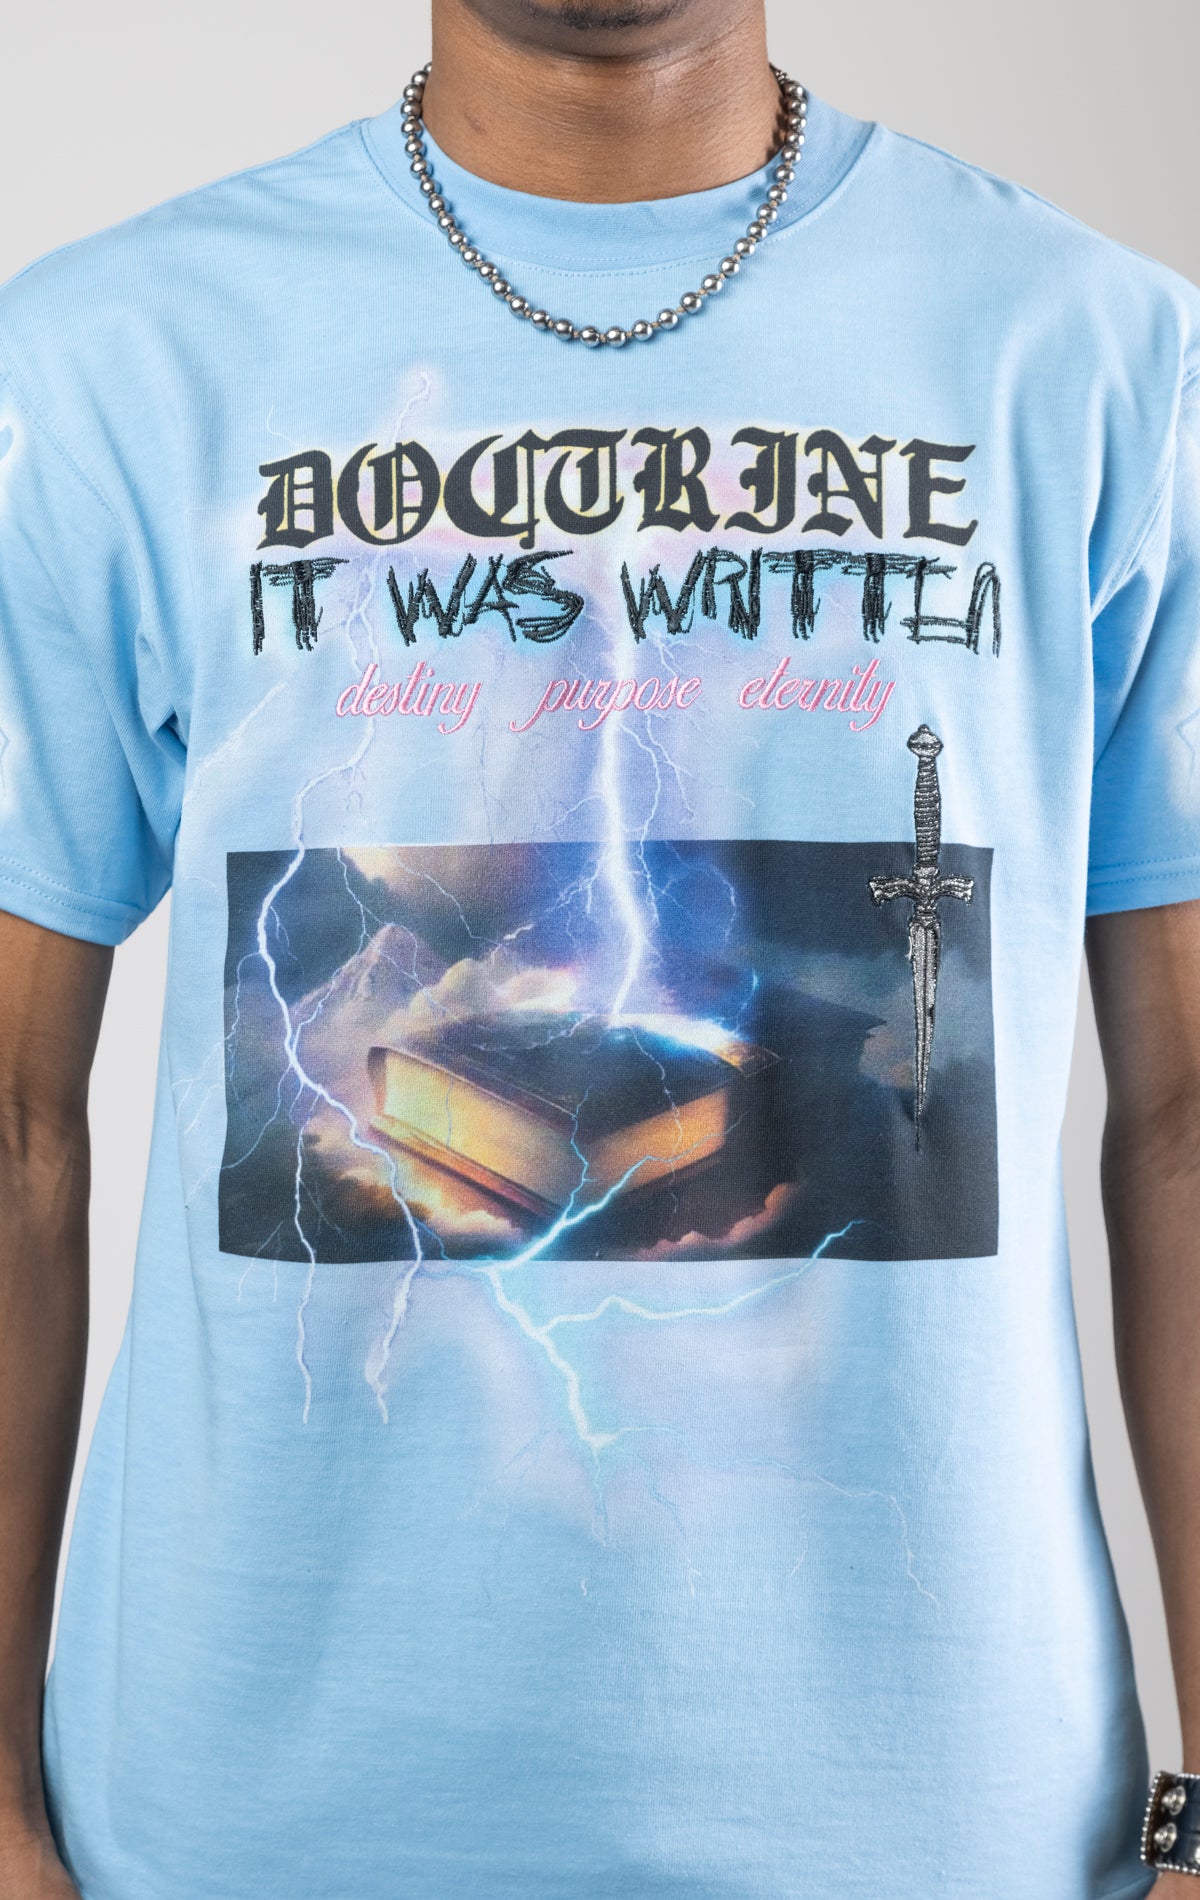 Sky blue t-shirt with a digital photo print on the front and back, embroidered text on the front, and a 3D metallic dagger embroidered on the back.